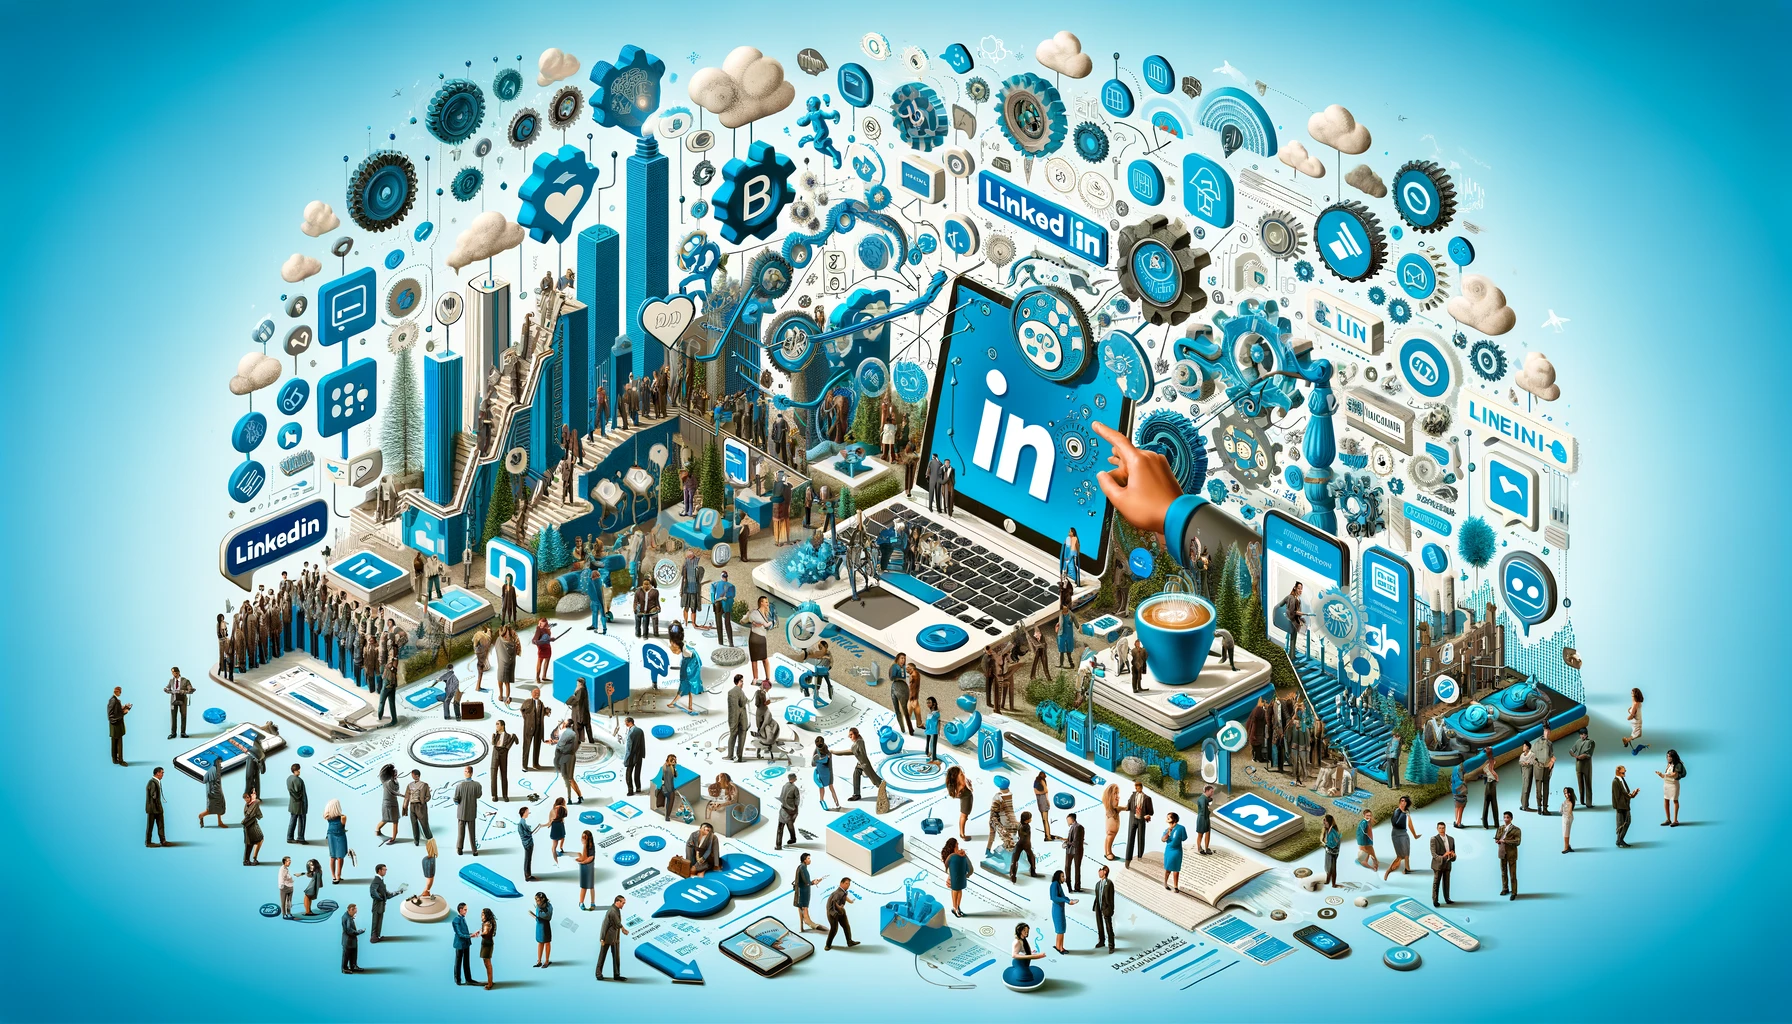 How has LinkedIn become the main B2B social network to develop a B2B marketing campaign?